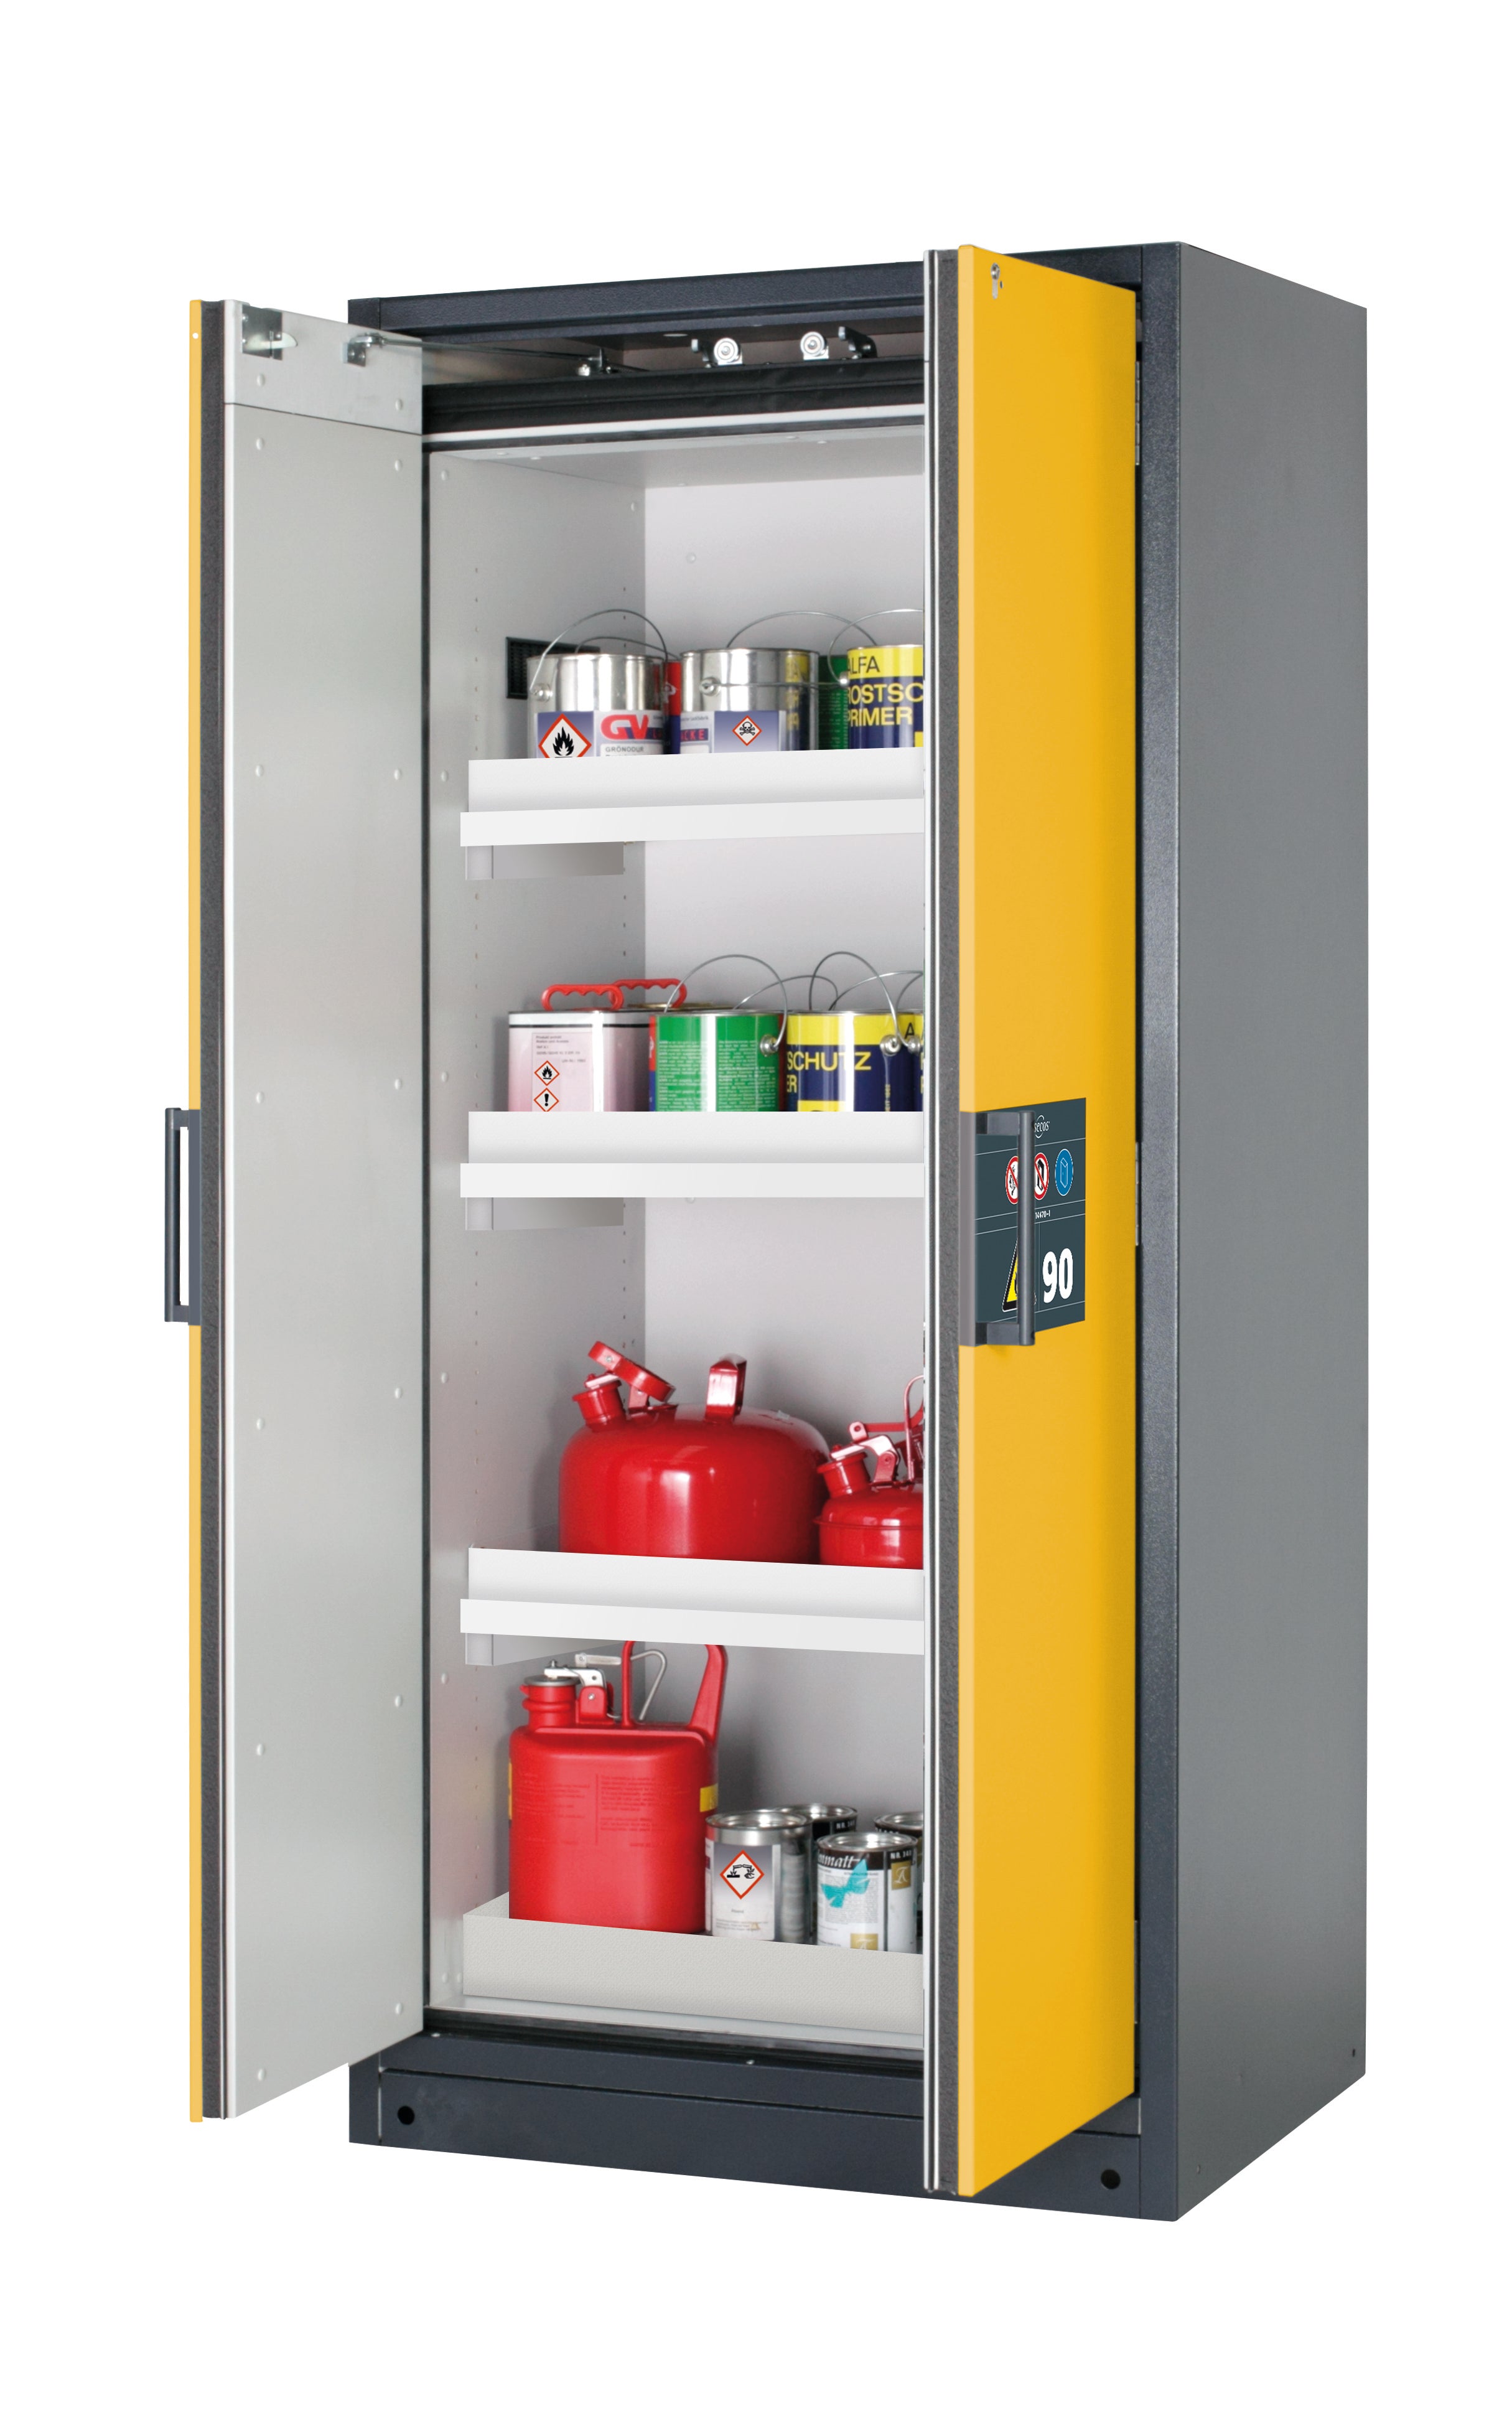 Type 90 safety storage cabinet Q-CLASSIC-90 model Q90.195.090 in warning yellow RAL 1004 with 3x tray shelf (standard) (polypropylene),